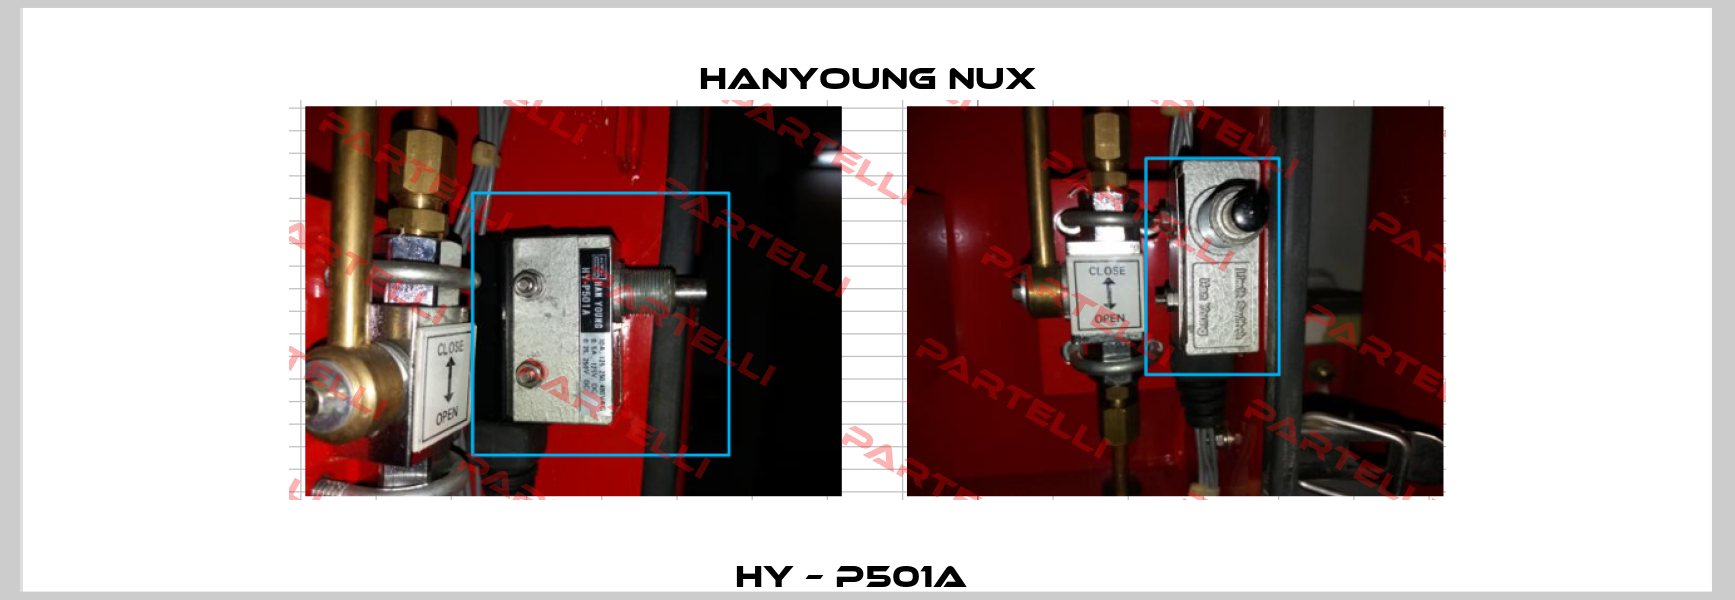 HY – P501A	  HanYoung NUX